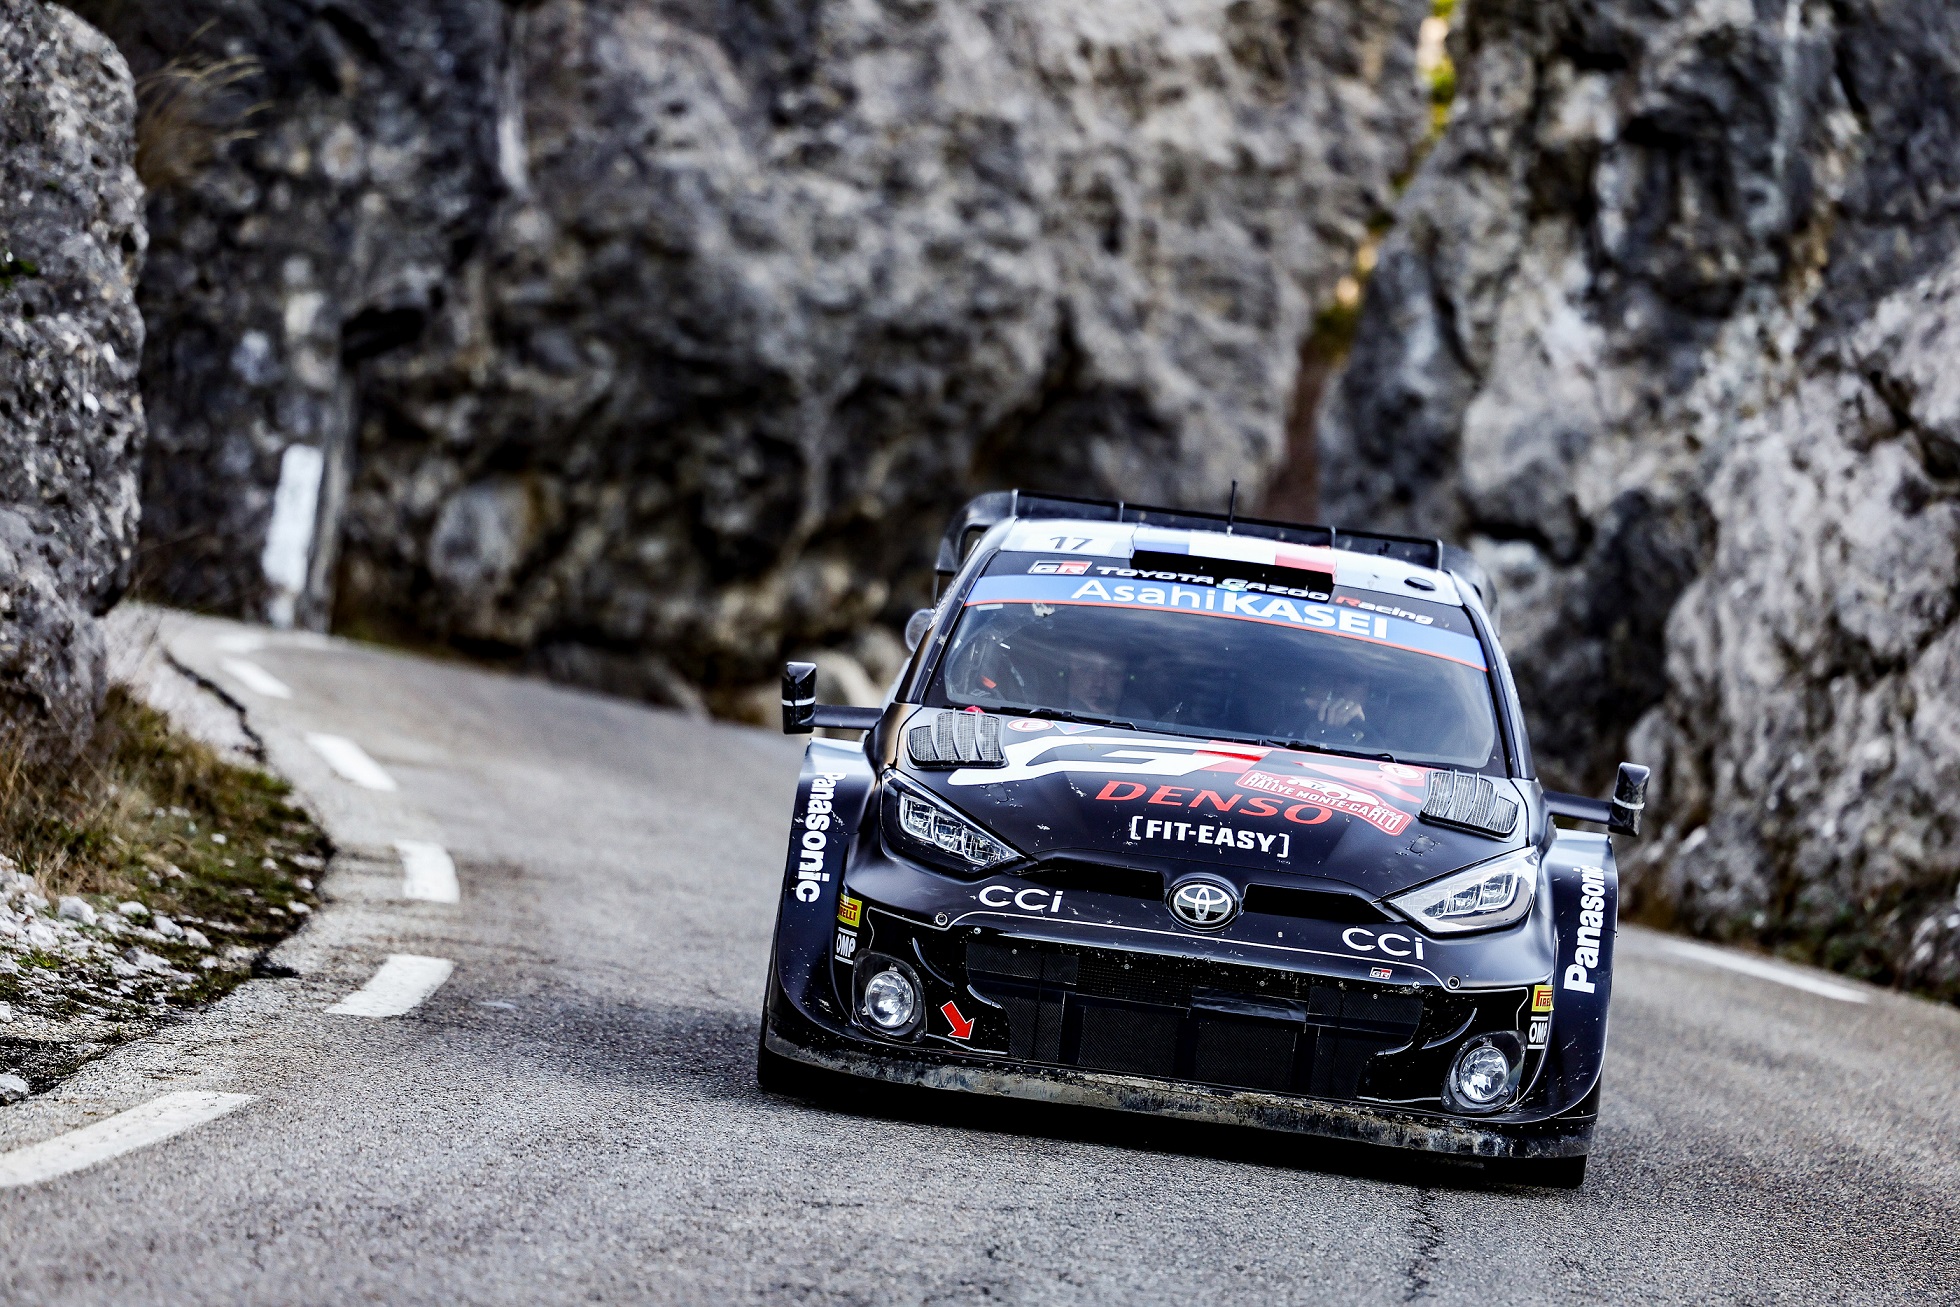 TOYOTA GAZOO Racing Secures Double Podium Finish to Start Season Strong in Monte-Carlo